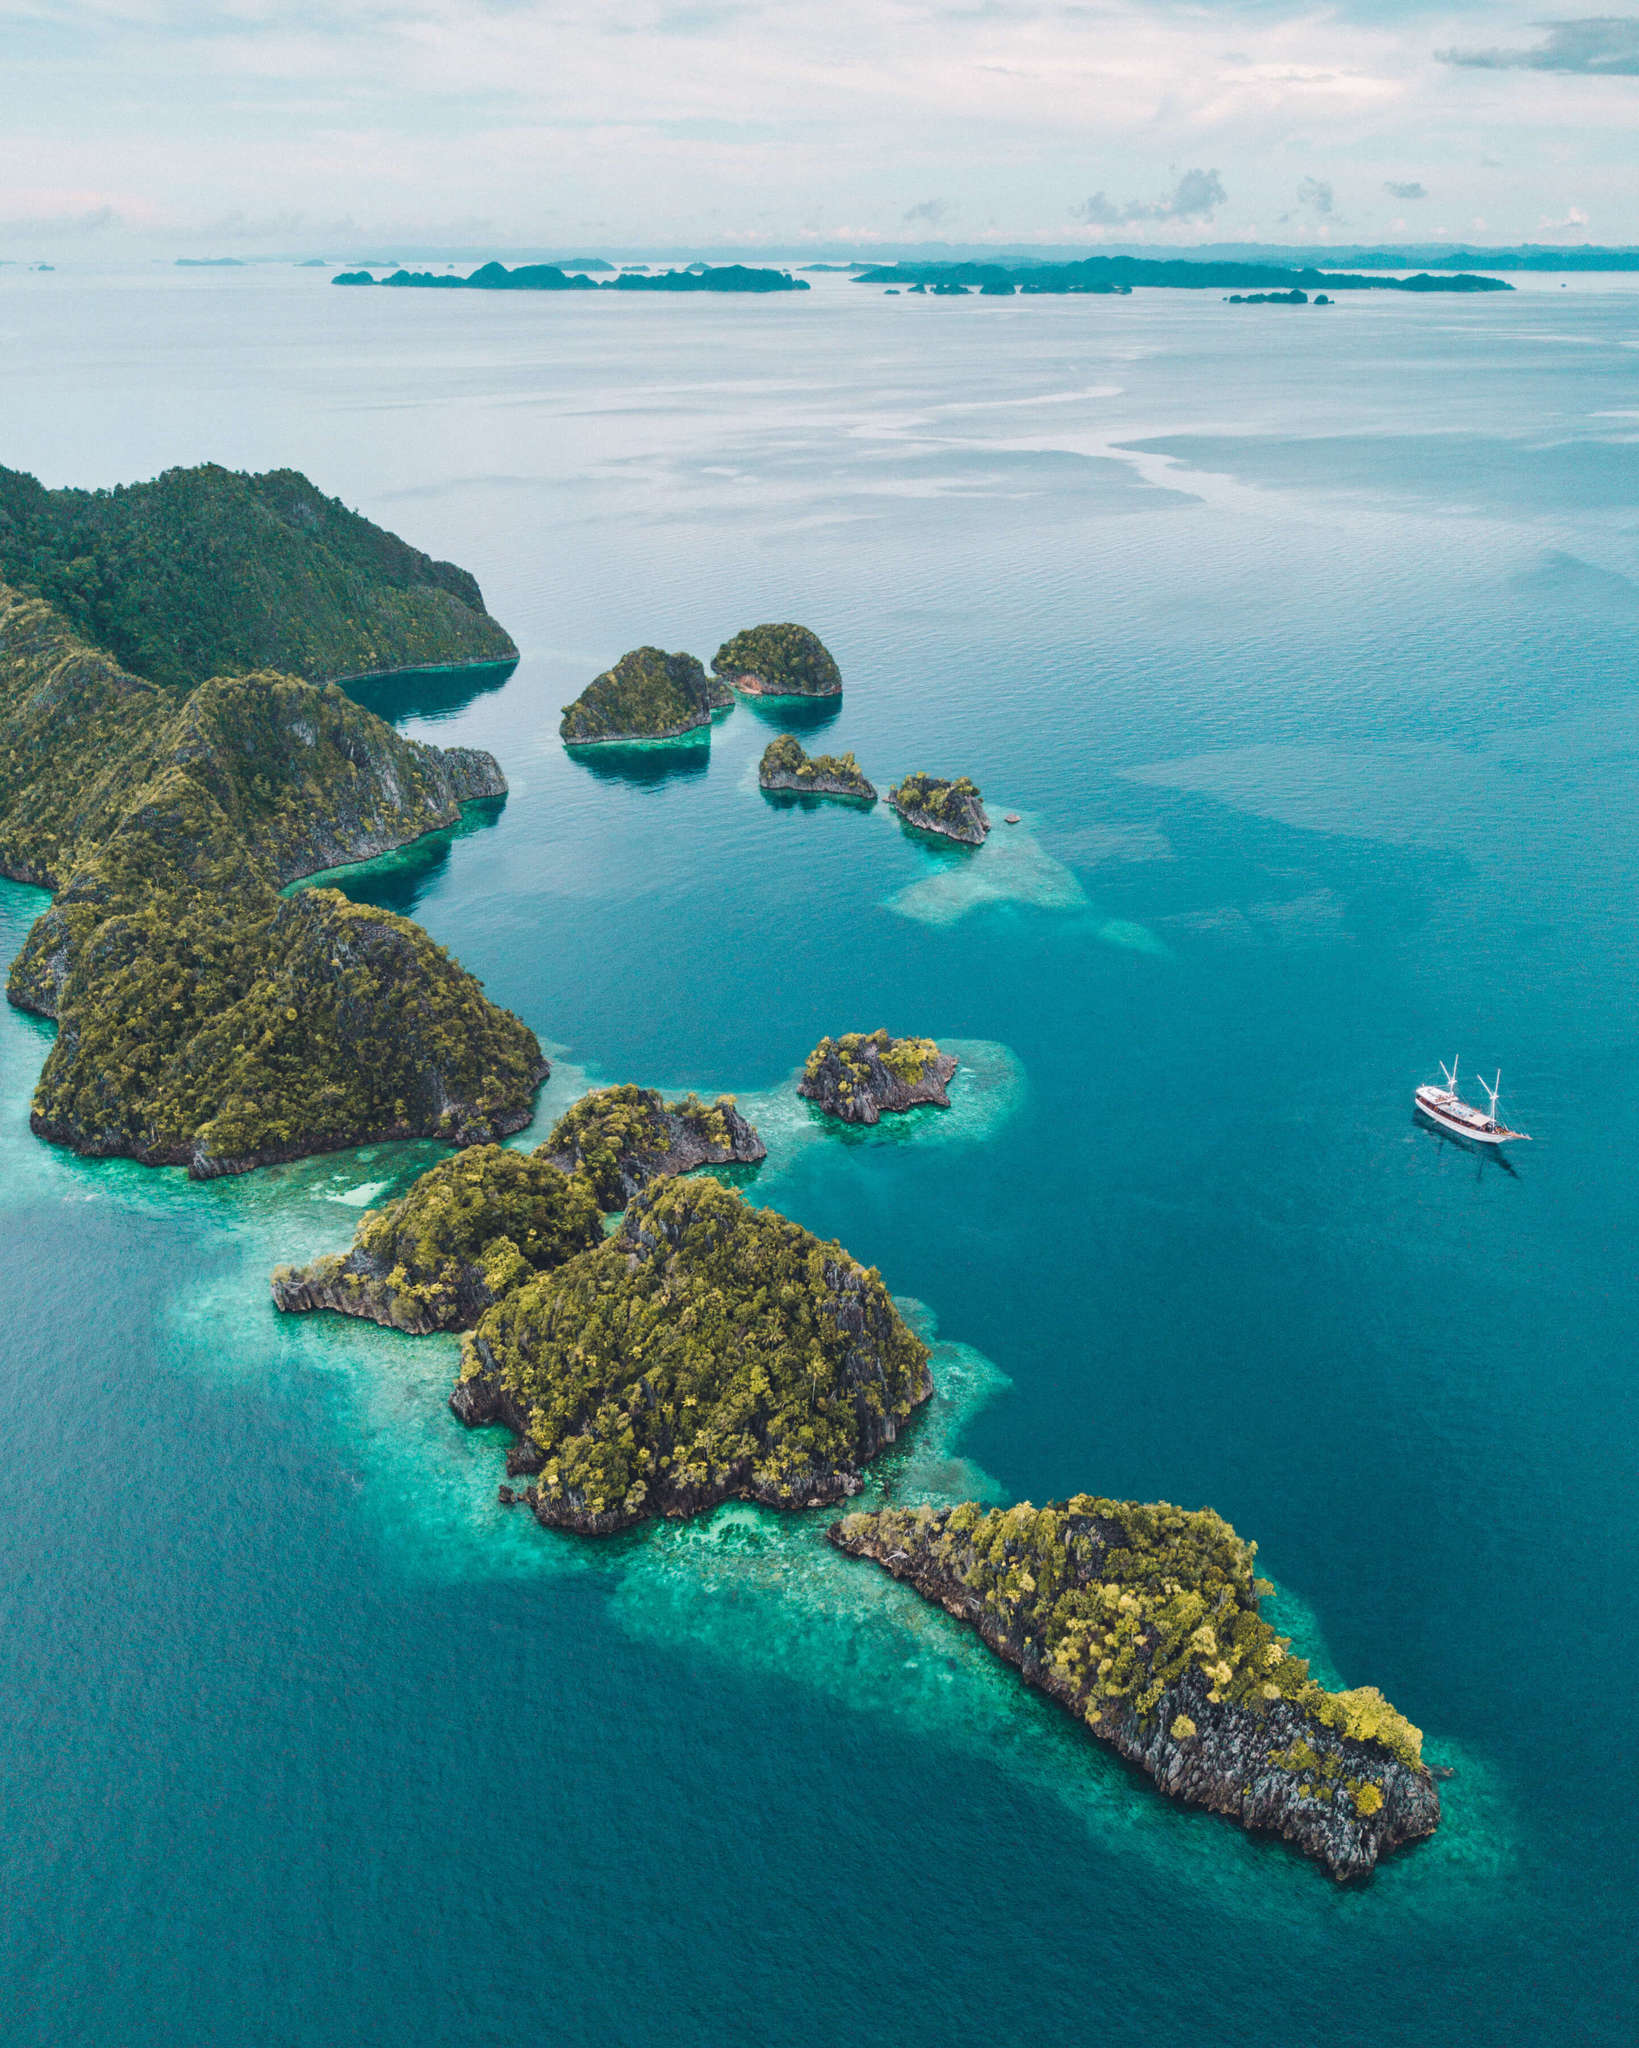 20 Photos to Inspire You to Visit Raja Ampat • The Blonde Abroad